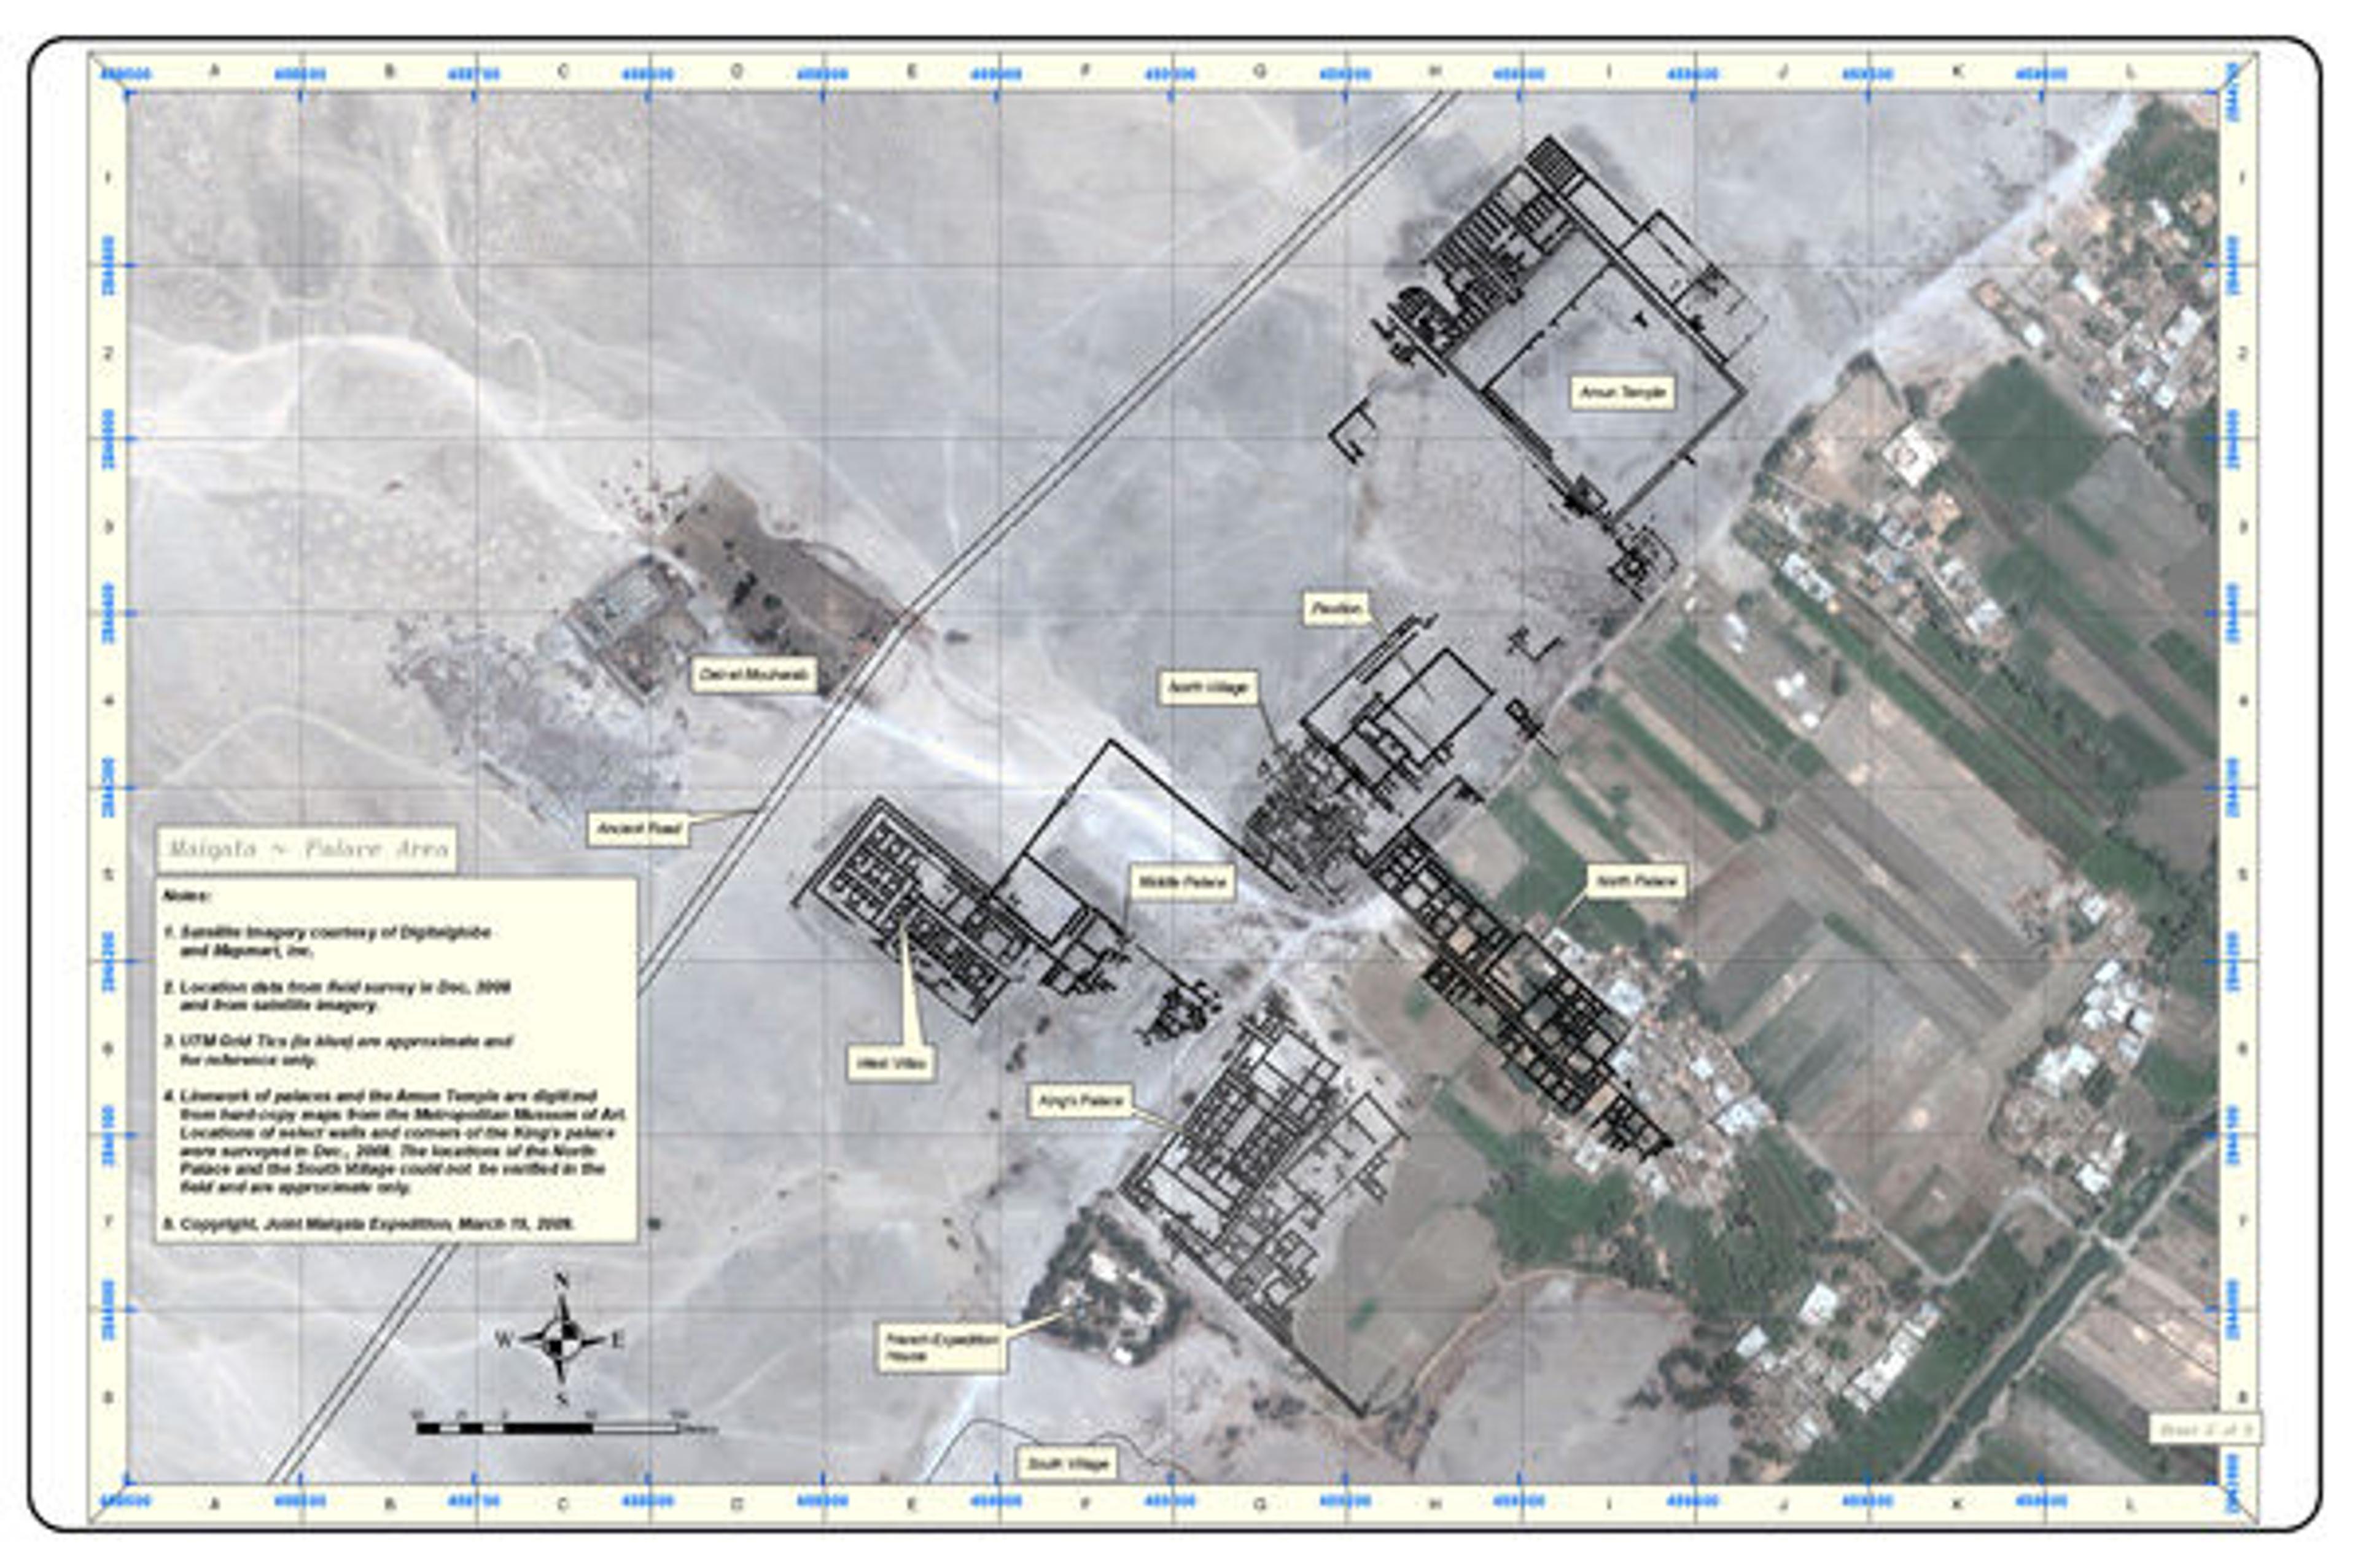 Map of the palace city of Amenhotep III at Malqata, created by Joel Paulson using plans from the Egyptian Expedition archives and satellite imagery courtesy of Digitalglobal and MapMart, Inc.